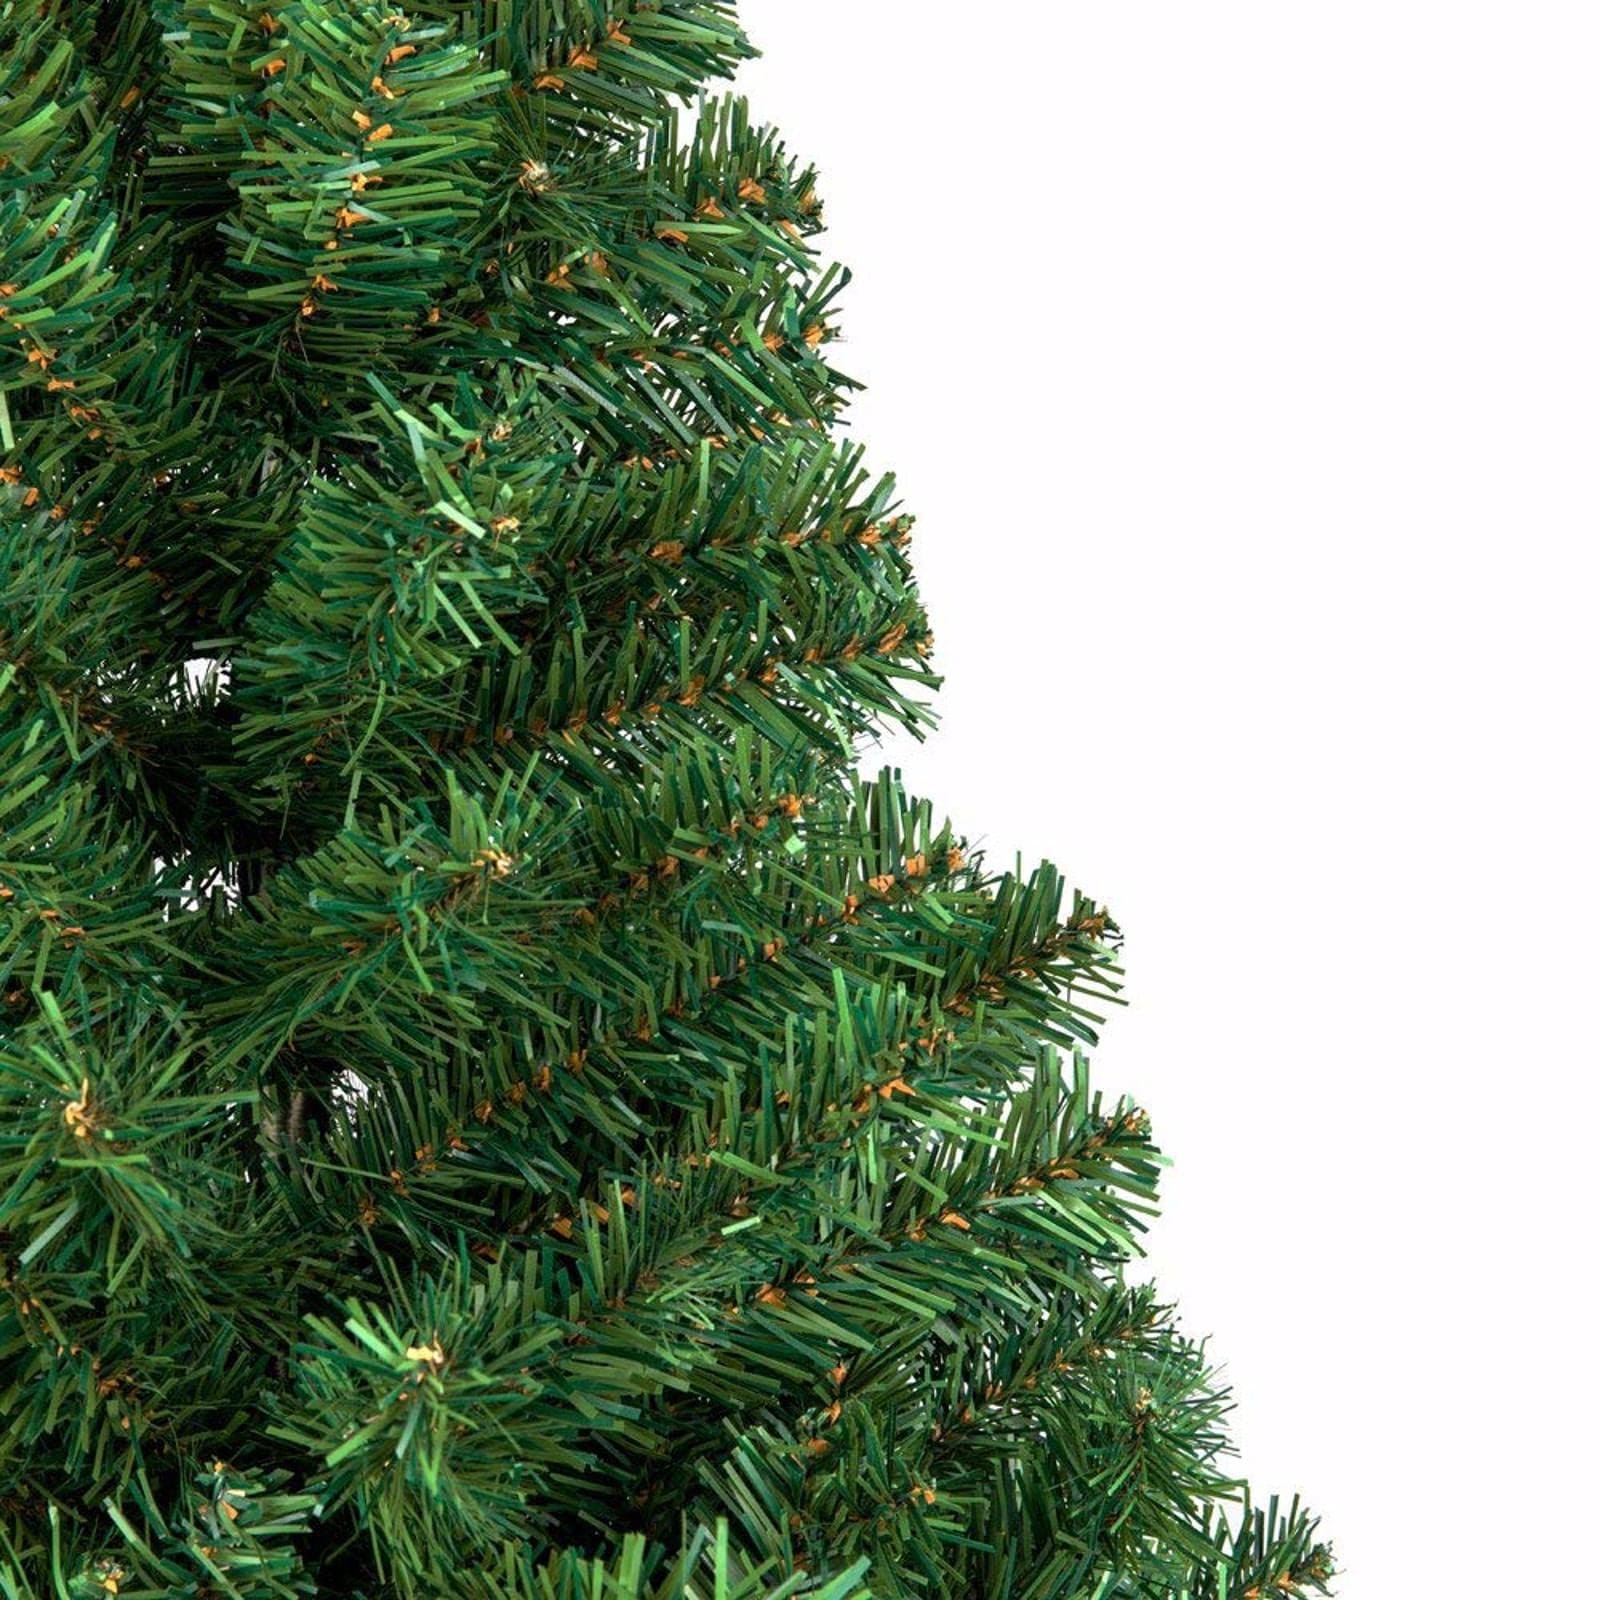 Artificial Christmas Tree - 6ft | 1050 Branches - HomeRelaxOfficial